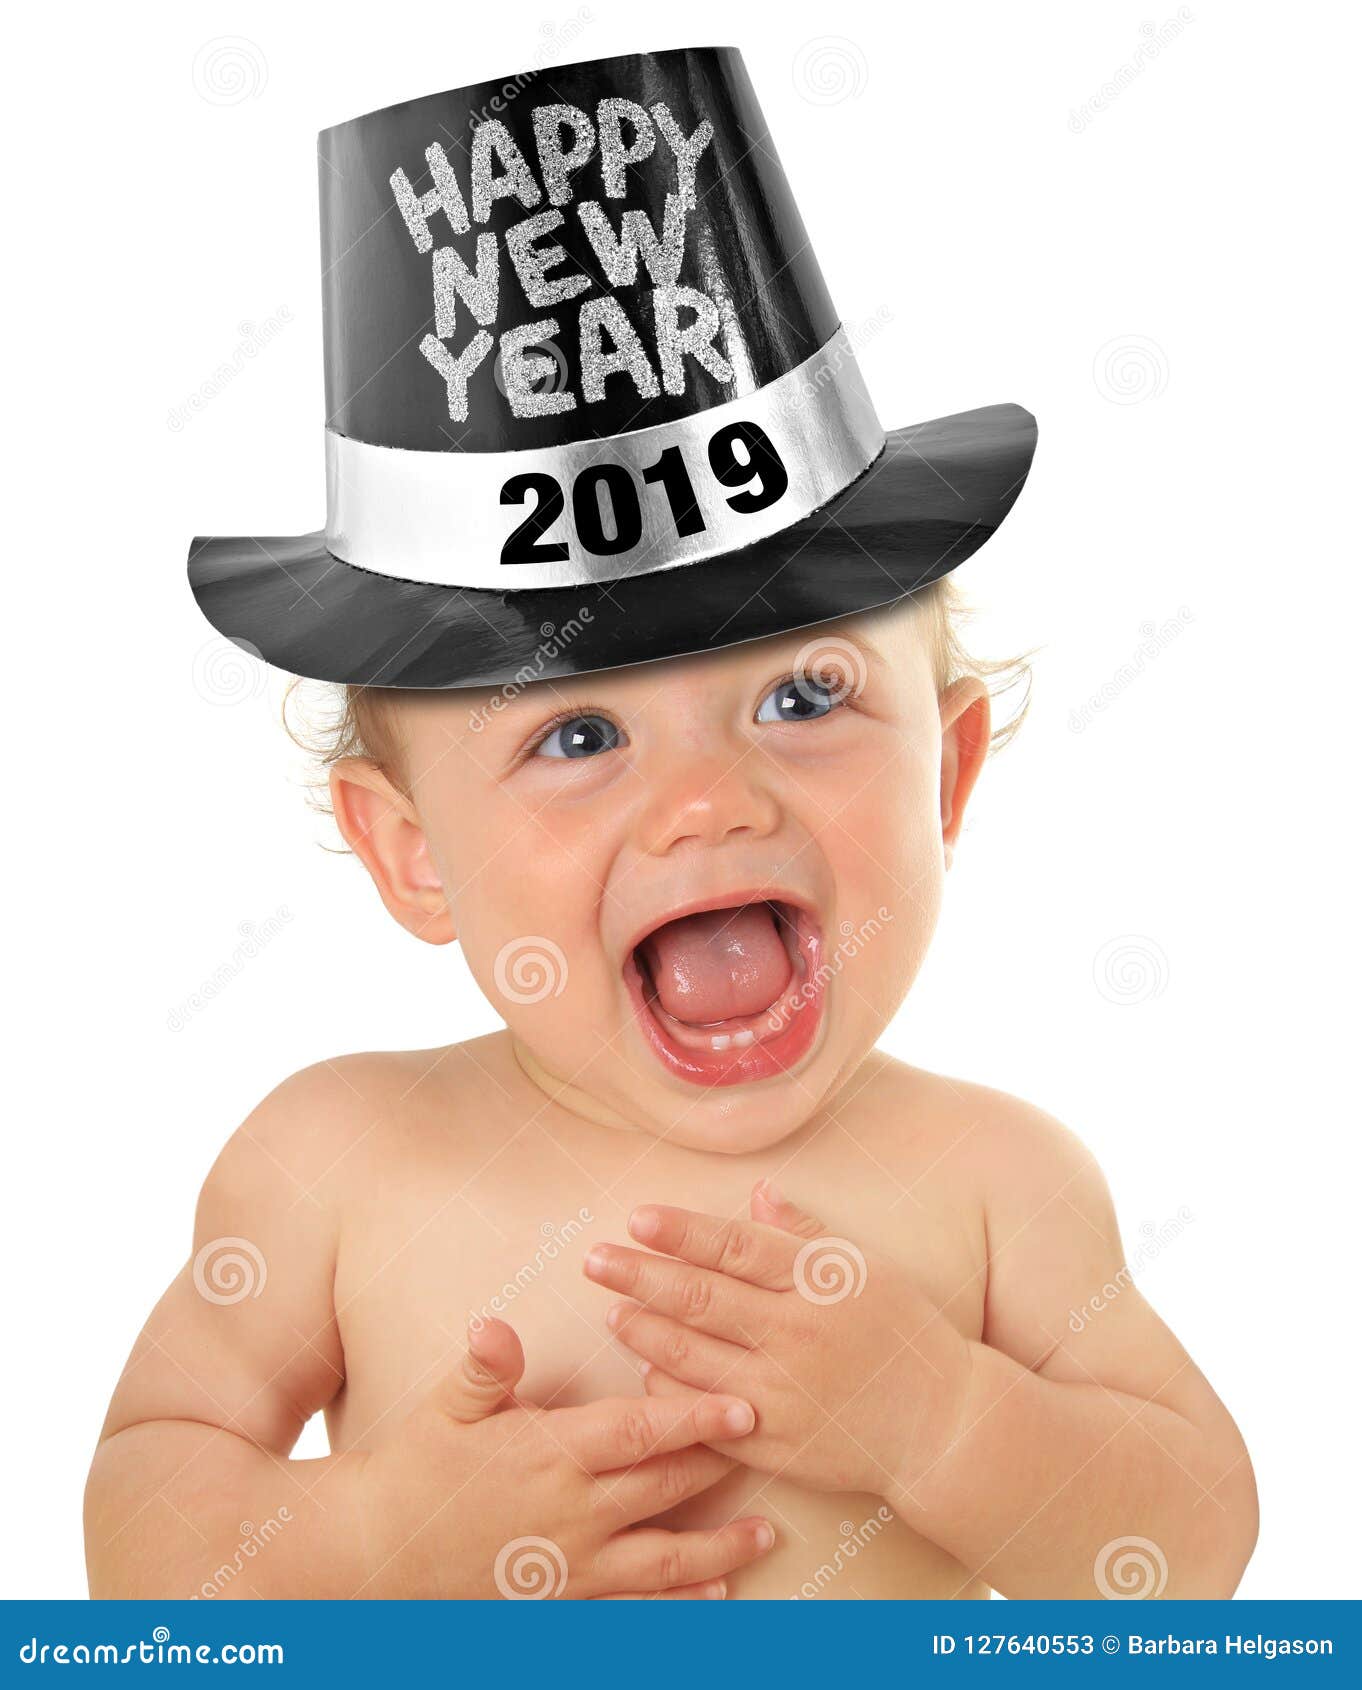 Happy new year baby 2019 stock image. Image of expression ...